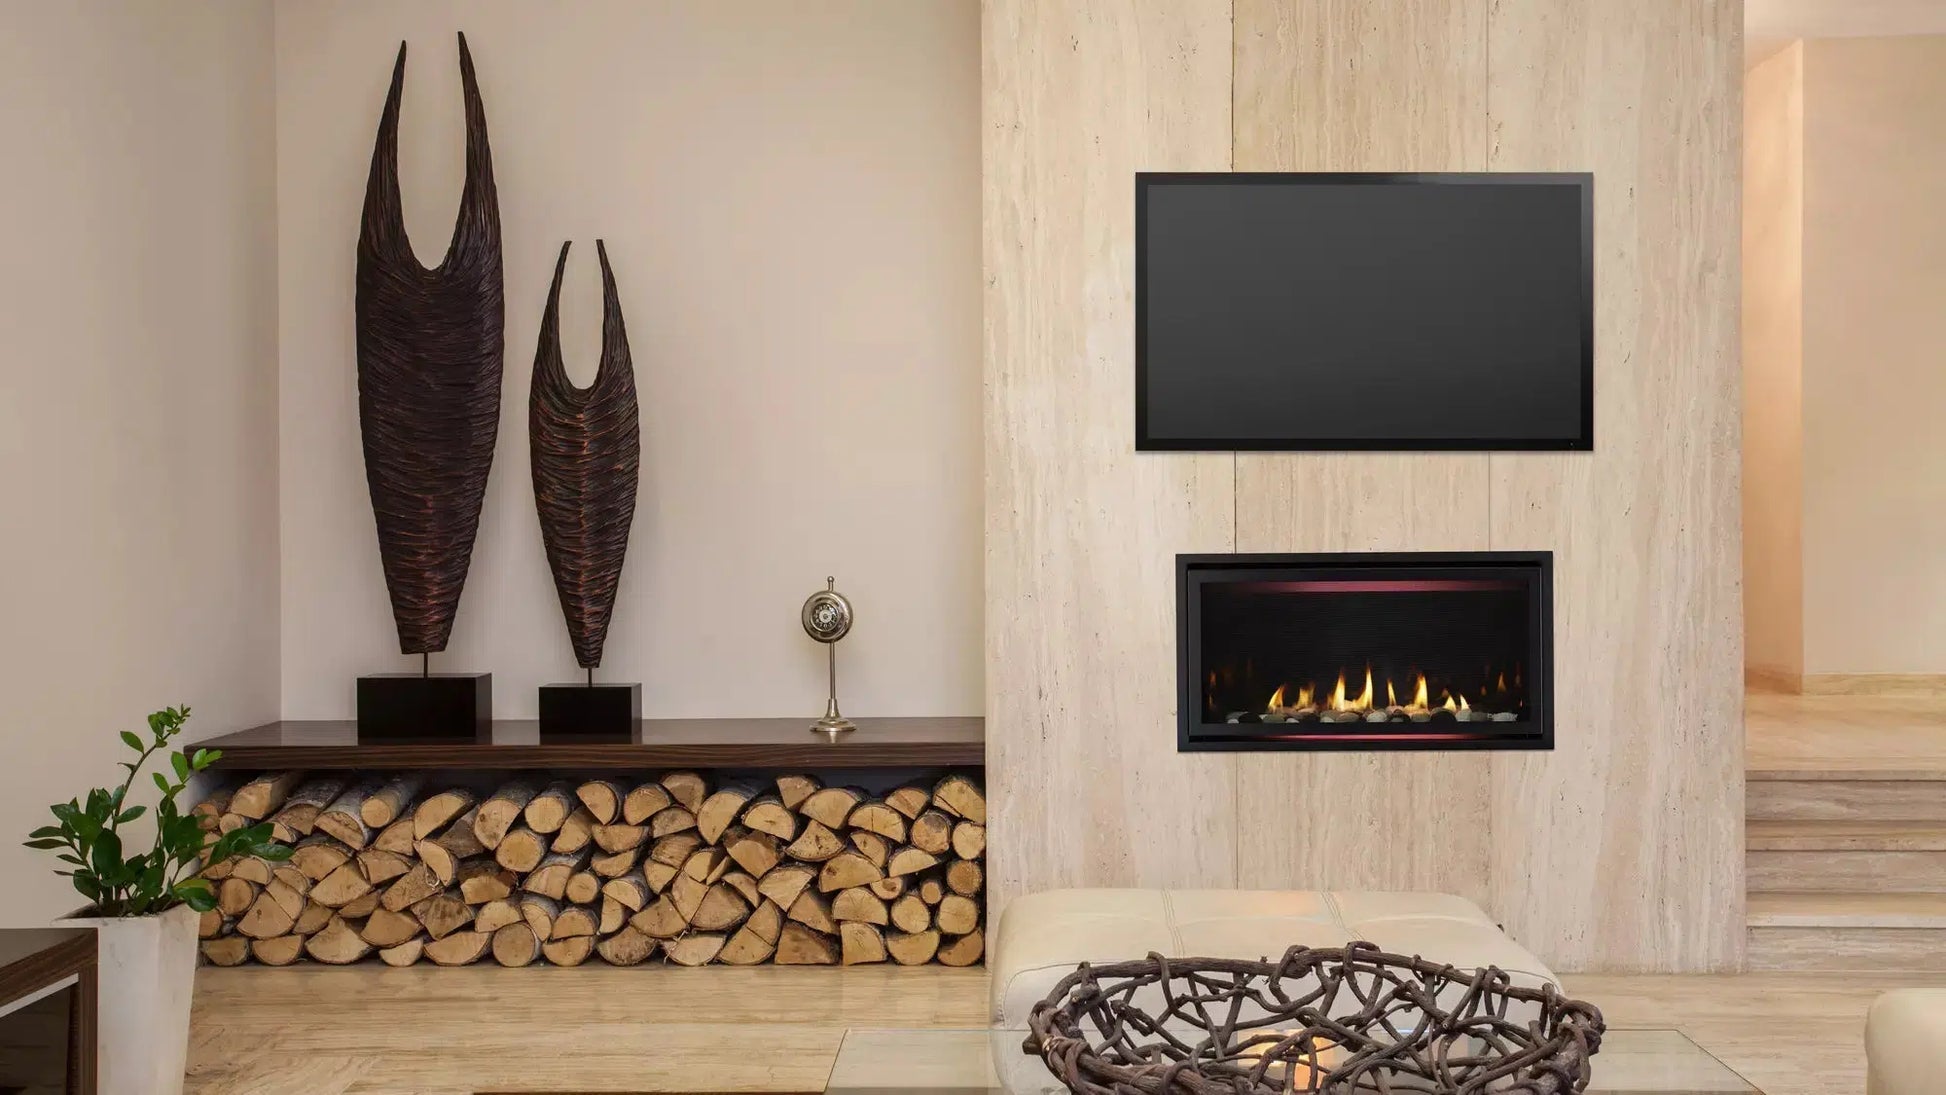 Heatilator Rave 32" Linear Contemporary Direct Vent Natural Gas Fireplace With IntelliFire Touch Ignition System